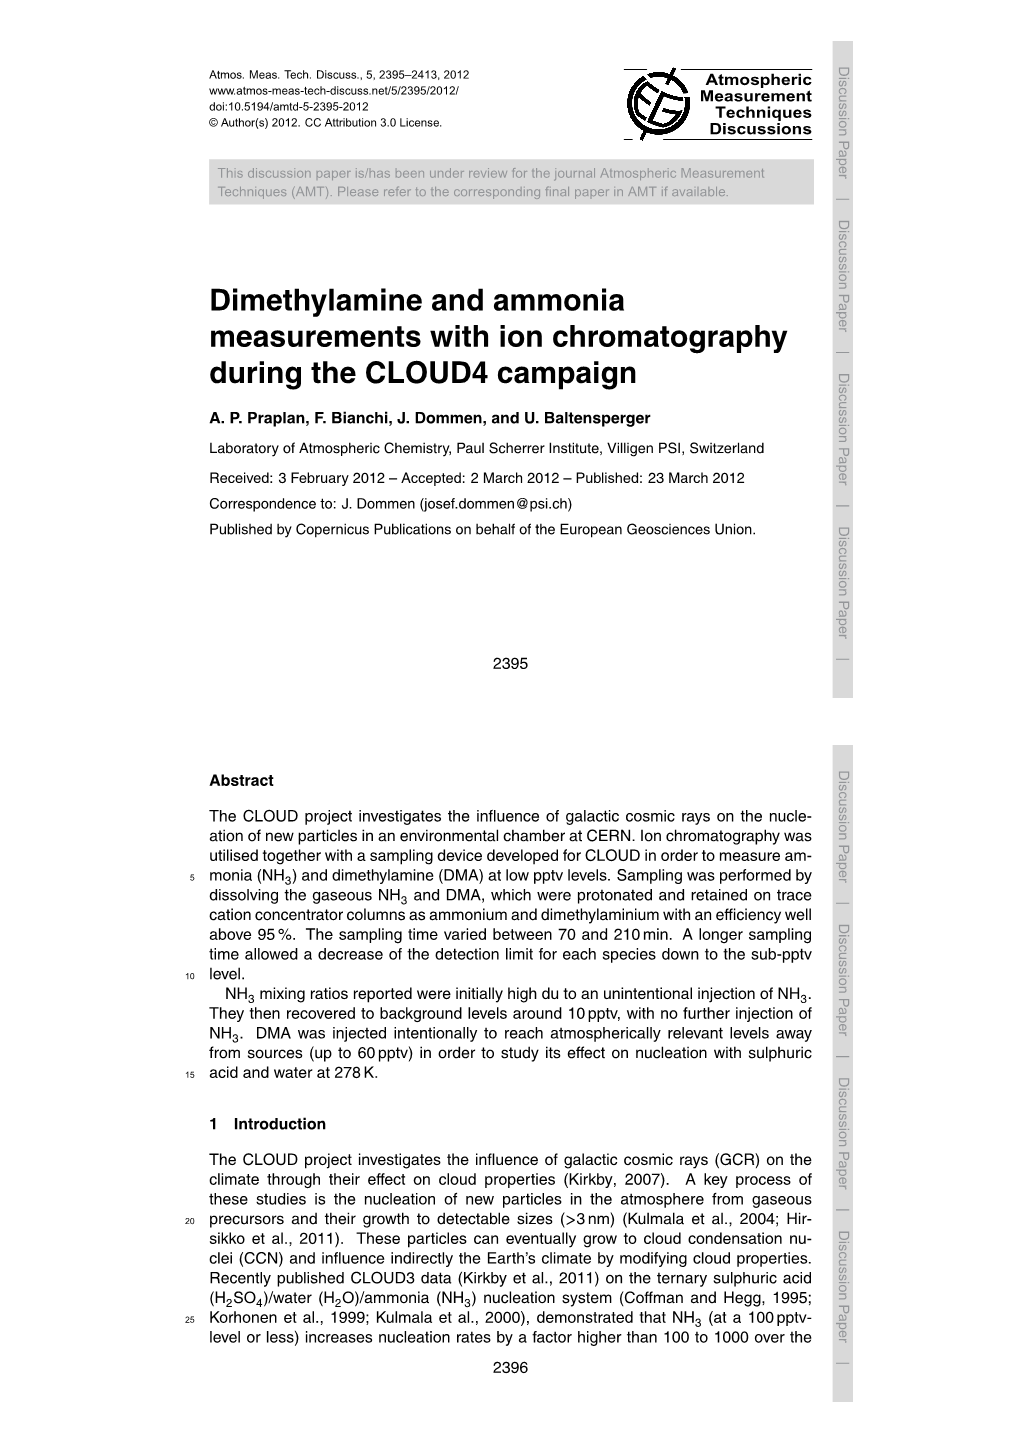 Dimethylamine and Ammonia Measurements with Ion Chromatography During the CLOUD4 Campaign A